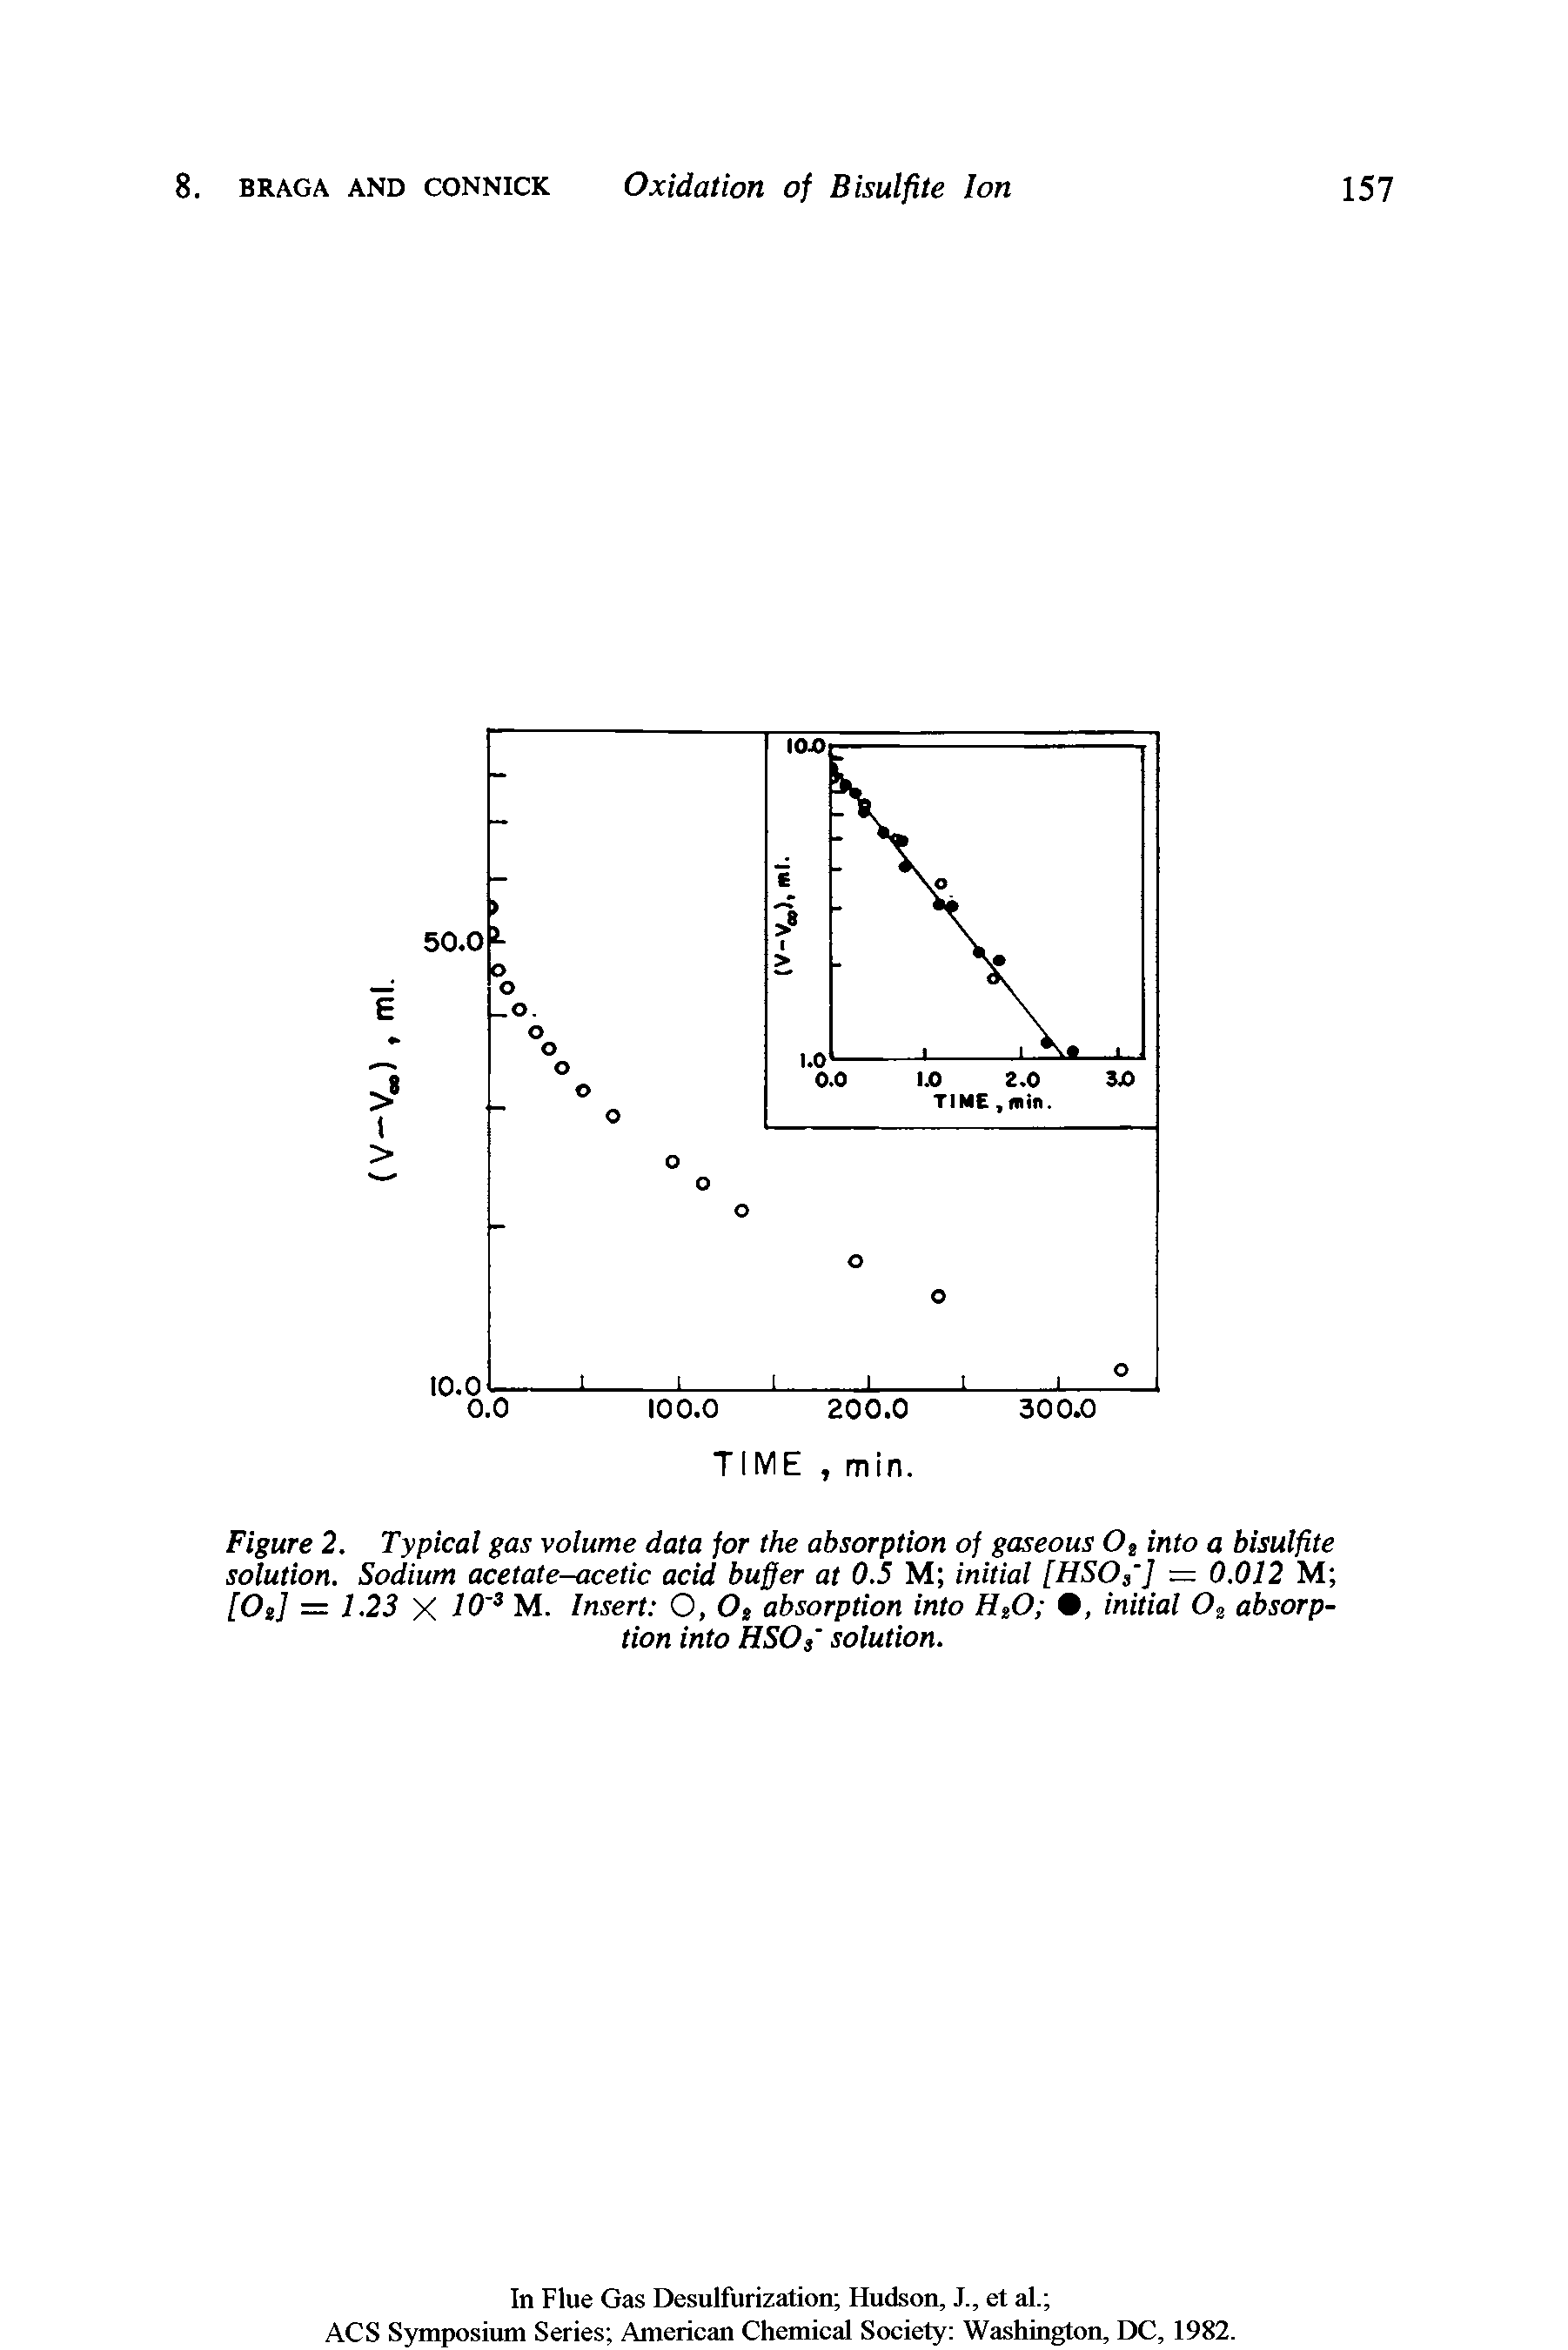 Figure 2. Typical gas volume data for the absorption of gaseous Oe into a bisulfite solution. Sodium acetate-acetic acid buffer at 0.5 M initial [HSOf] = 0.012 M [0 ] = 1.23 X 10 3 M. Insert O, 0 absorption into H20 , initial 02 absorption into HSOi solution.